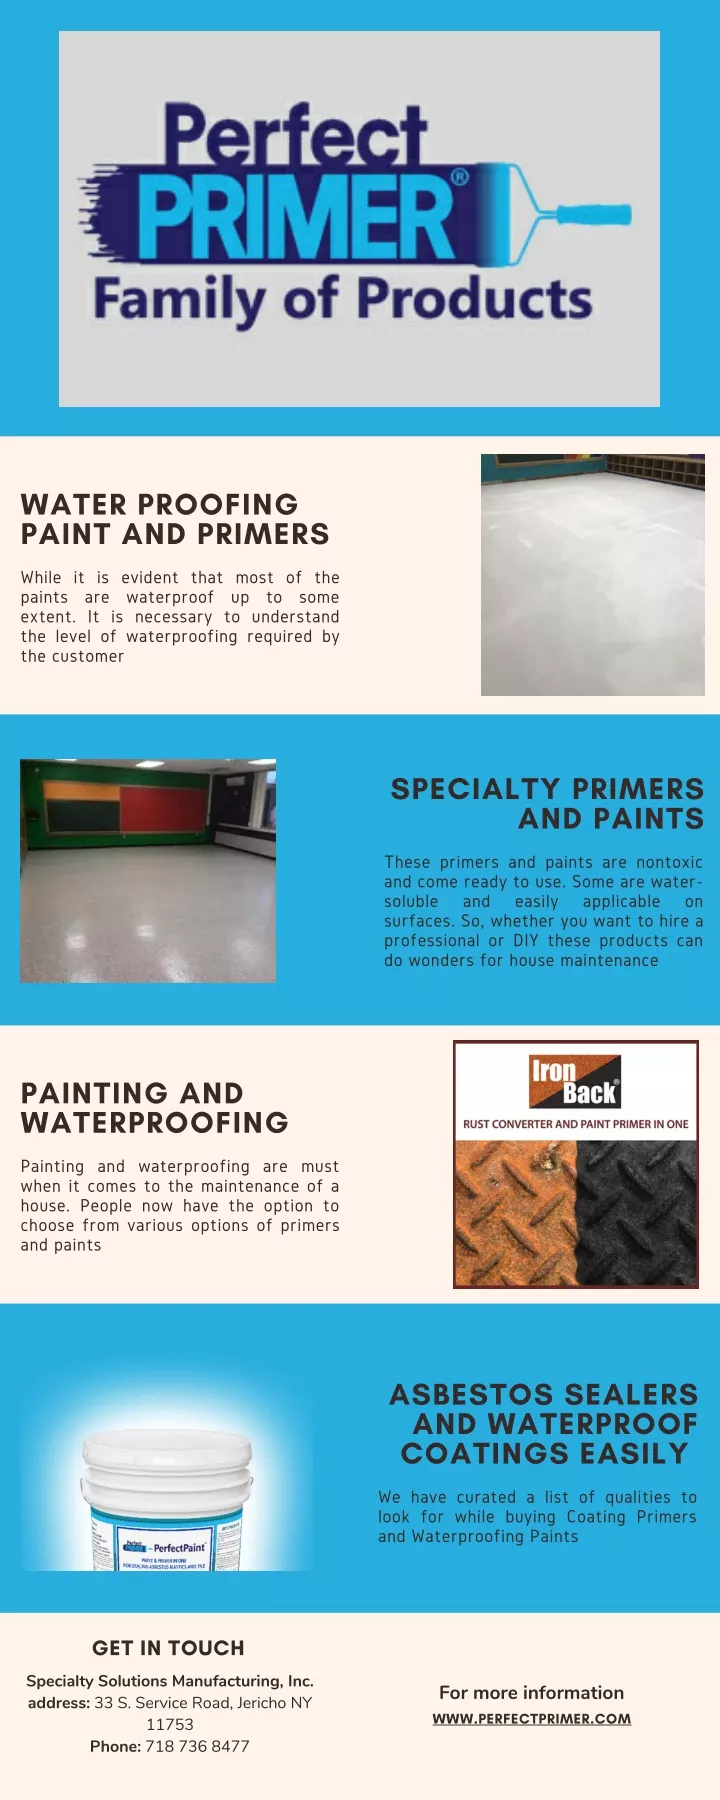 water proofing paint and primers